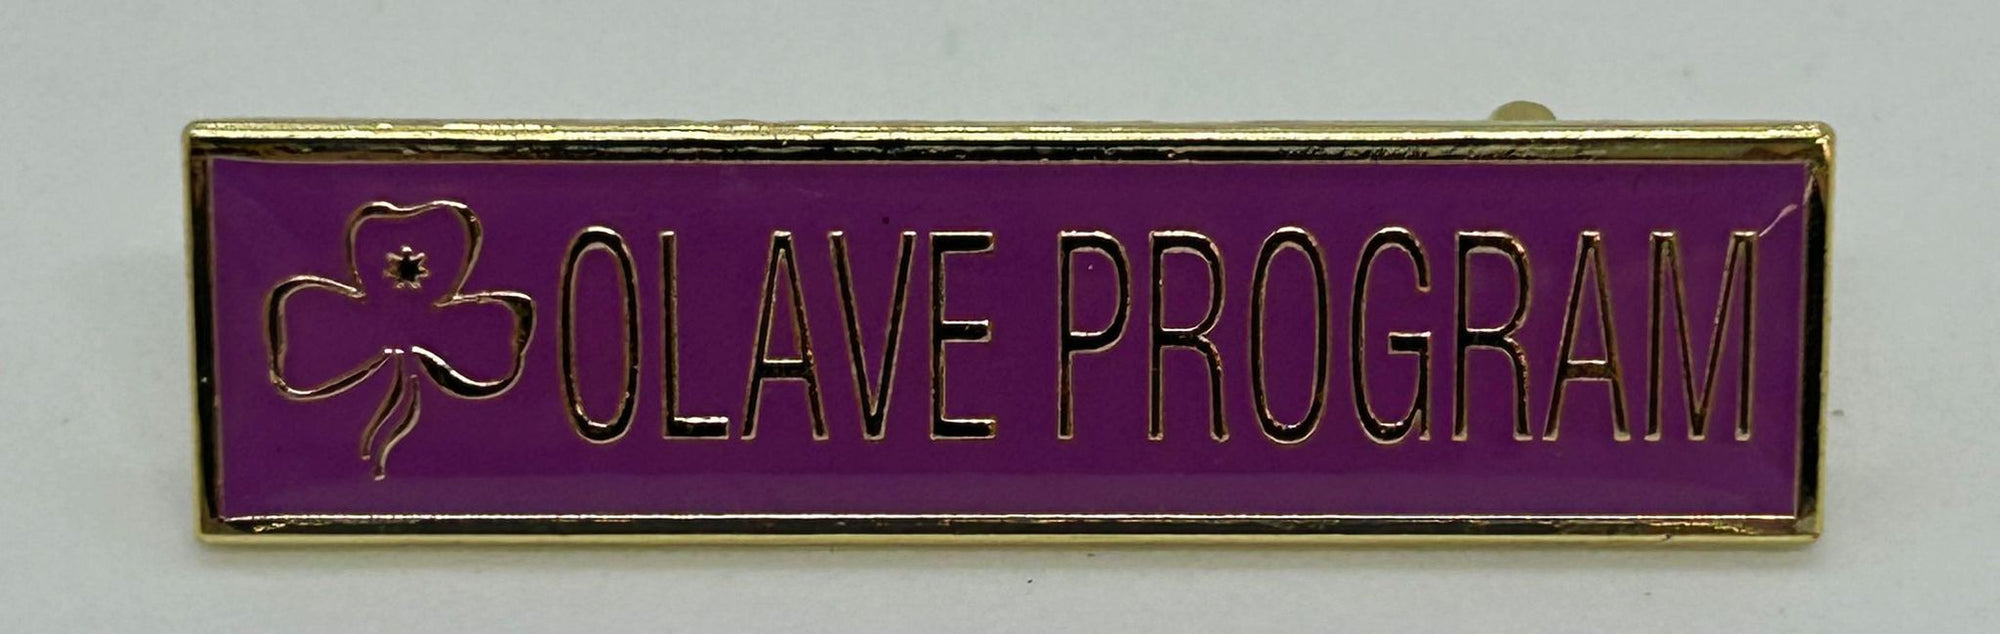 a rectangular metal badge with a purple enamel front with the words olive program written in gold